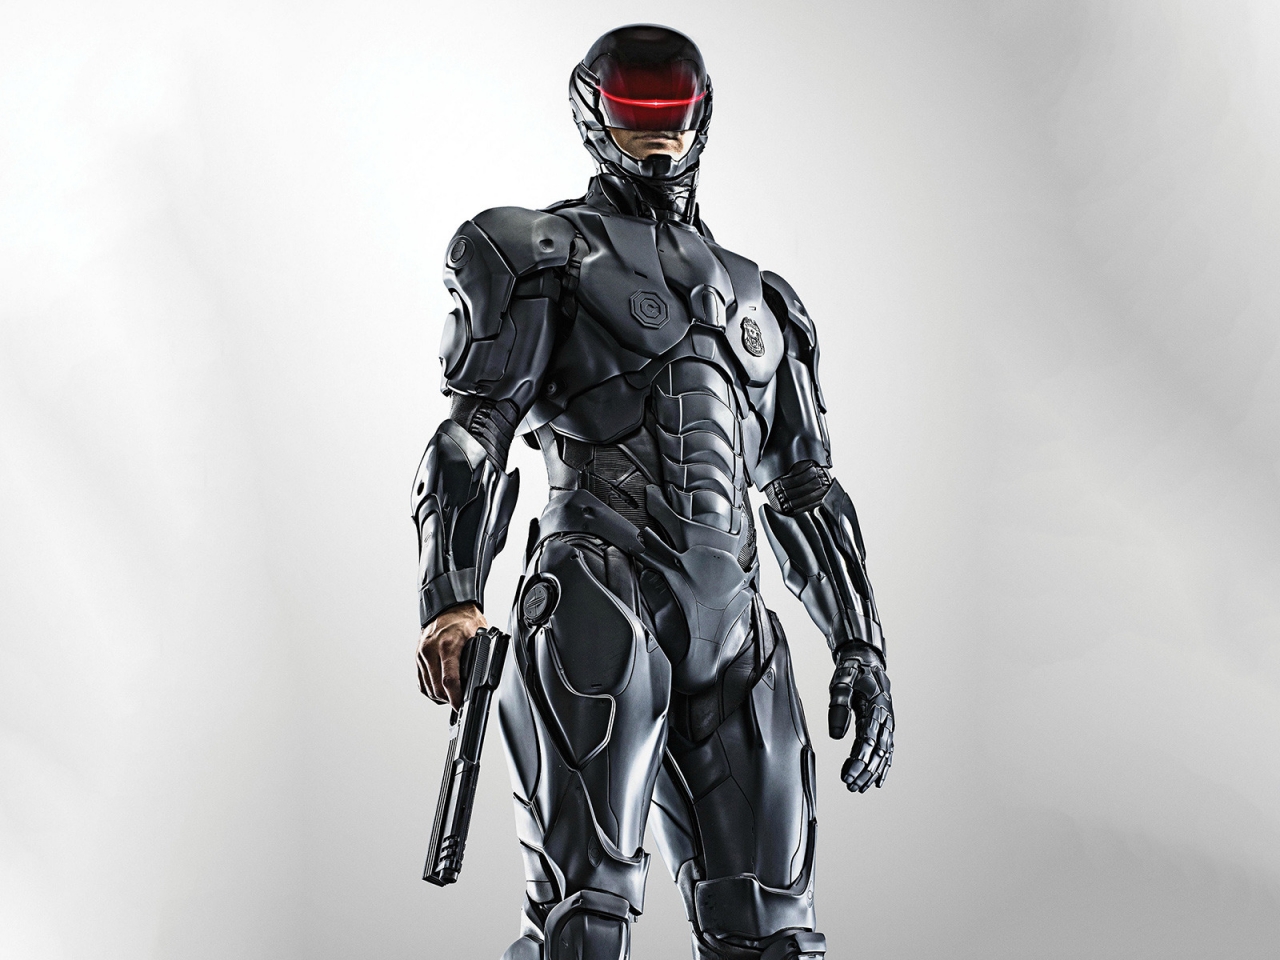 Robocop 2014 Poster for 1280 x 960 resolution